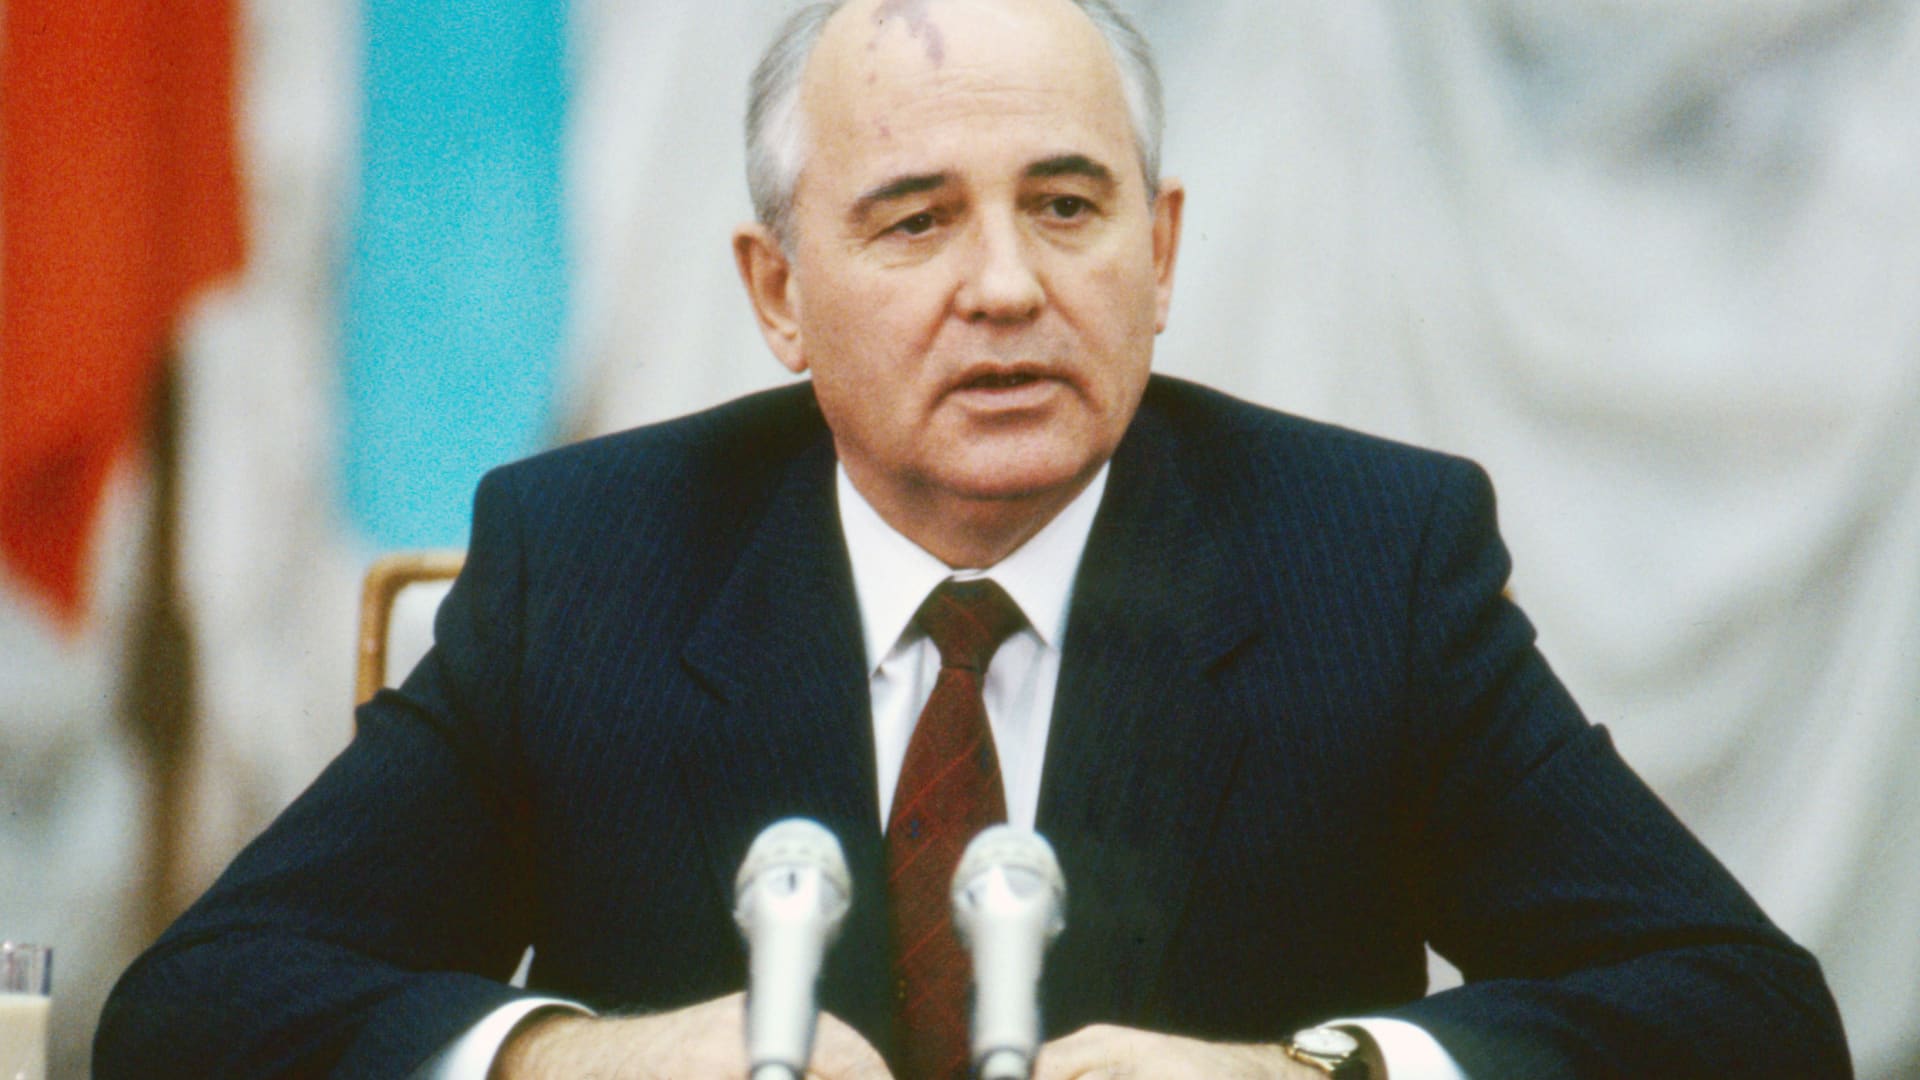 Mikhail Gorbachev, ex-Soviet leader who ended the Cold War, dies aged 91, report says